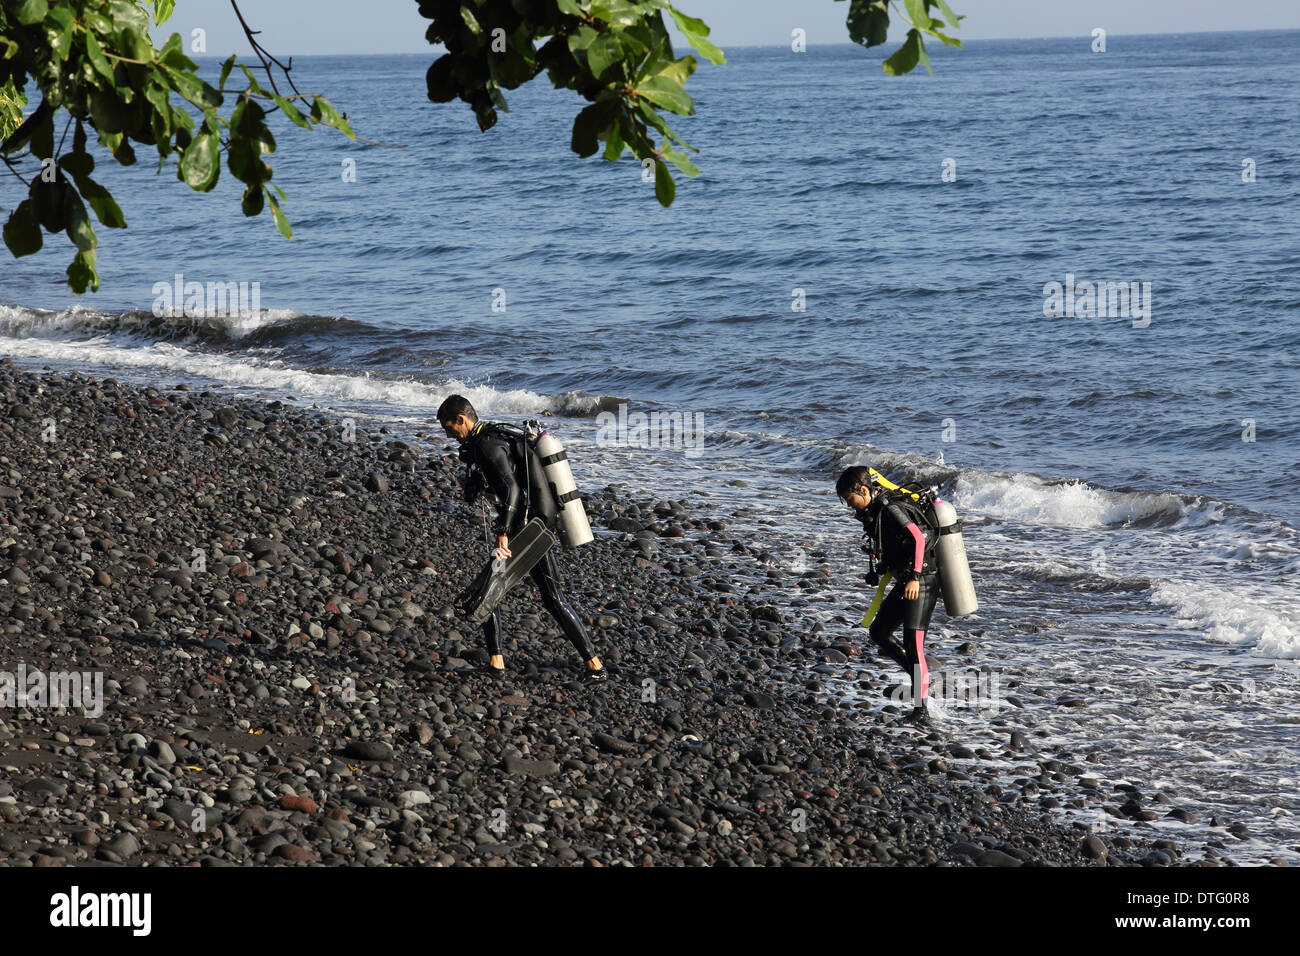 Scuba divers exit the ocean after diving in Tulamben, east Bali Stock Photo